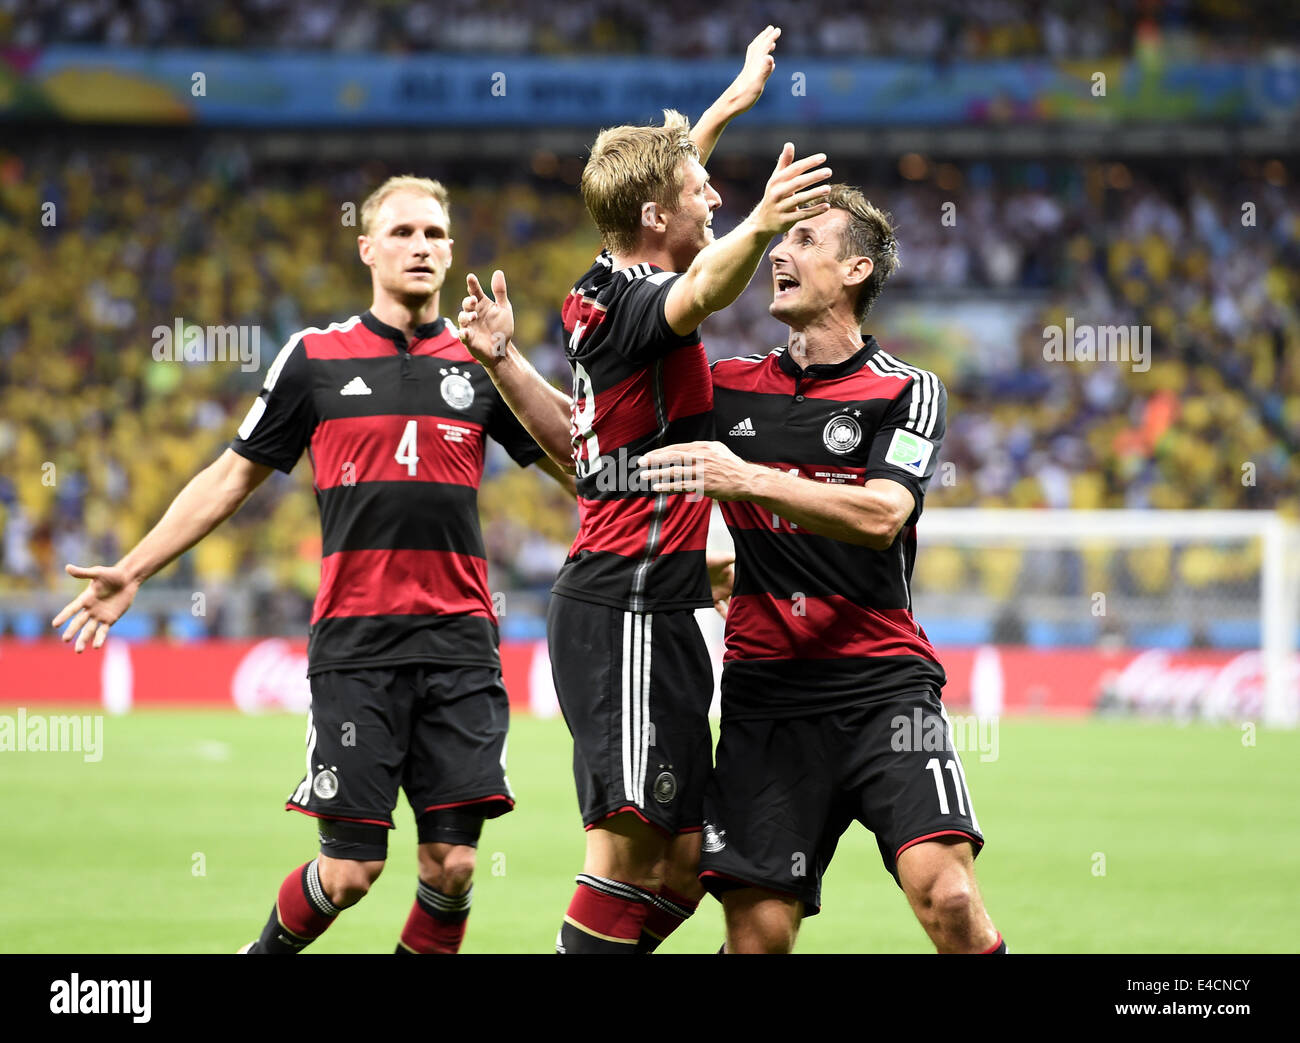 Belo Horizonte, Brazil. 8th July, 2014. Germany's Miroslav Klose (R) celebrates after Toni Kroos (C) scoring a goal during a semifinal match between Brazil and Germany of 2014 FIFA World Cup at the Estadio Mineirao Stadium in Belo Horizonte, Brazil, on July 8, 2014. Credit:  Qi Heng/Xinhua/Alamy Live News Stock Photo